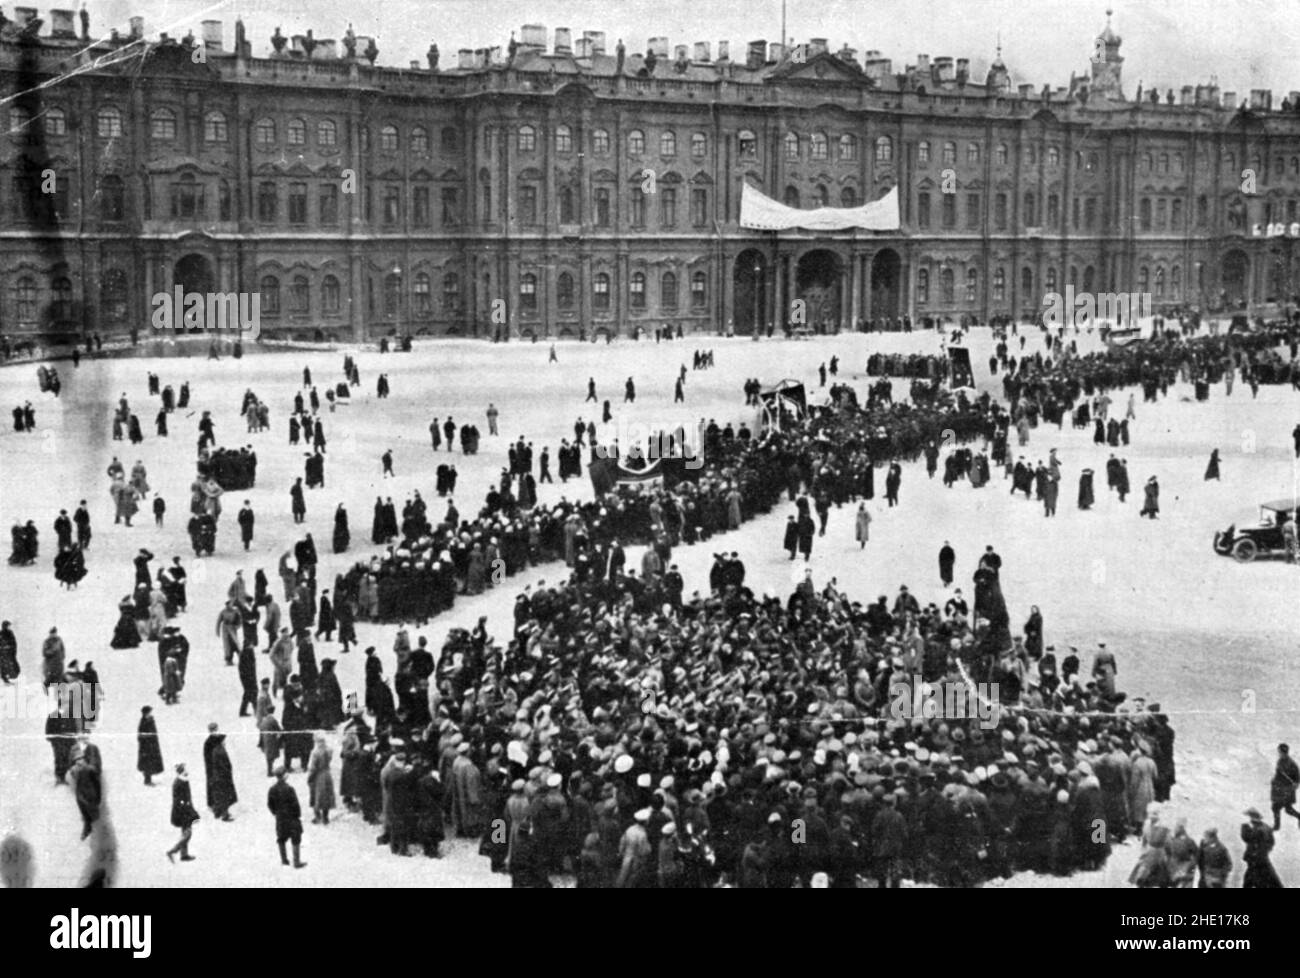 Protesters in front of the Winter Palace in Petrograd (St. Petersburg) in January 1917, before the February Revolution. Stock Photo